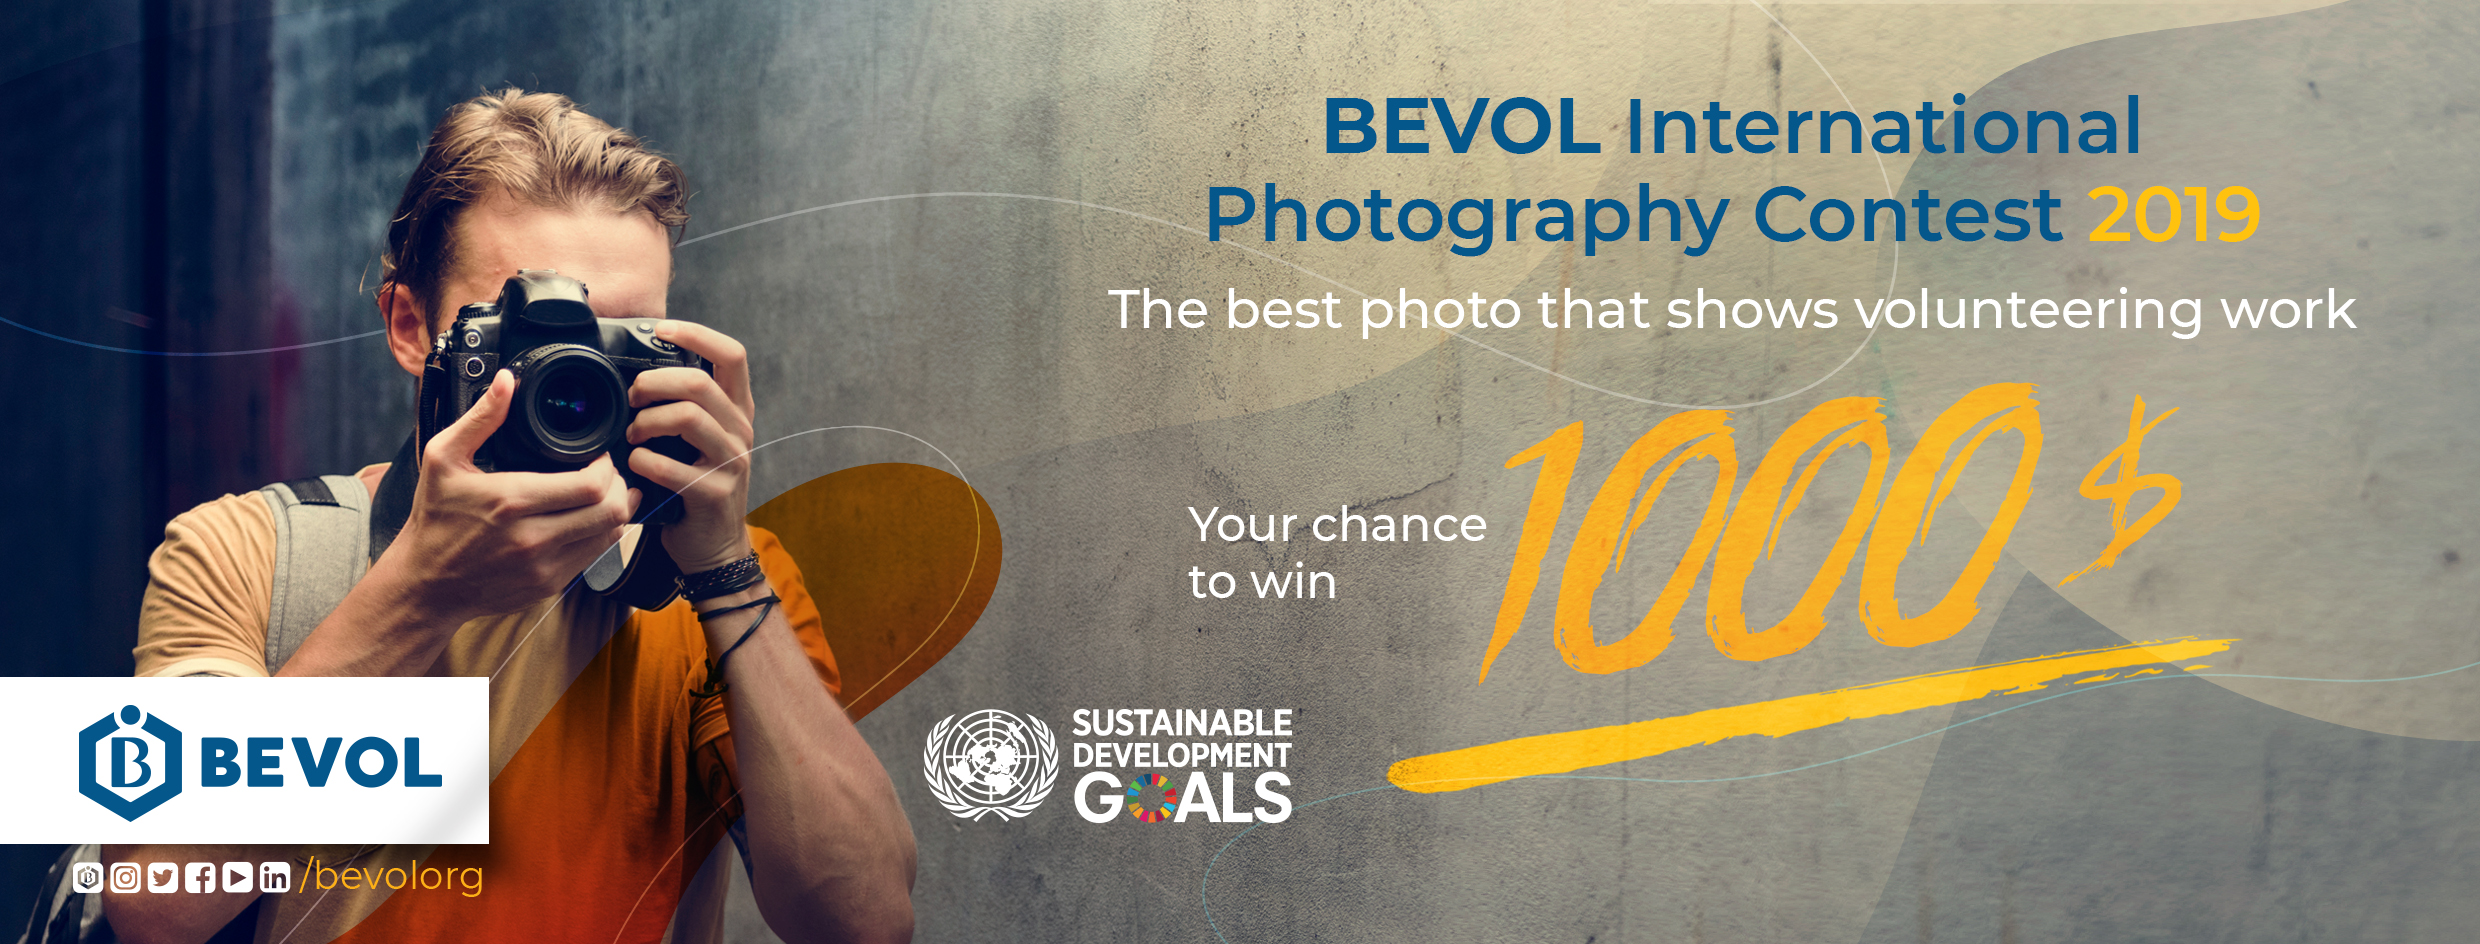 BEVOL International Photography Contest 2019 The best photo that shows volunteering work